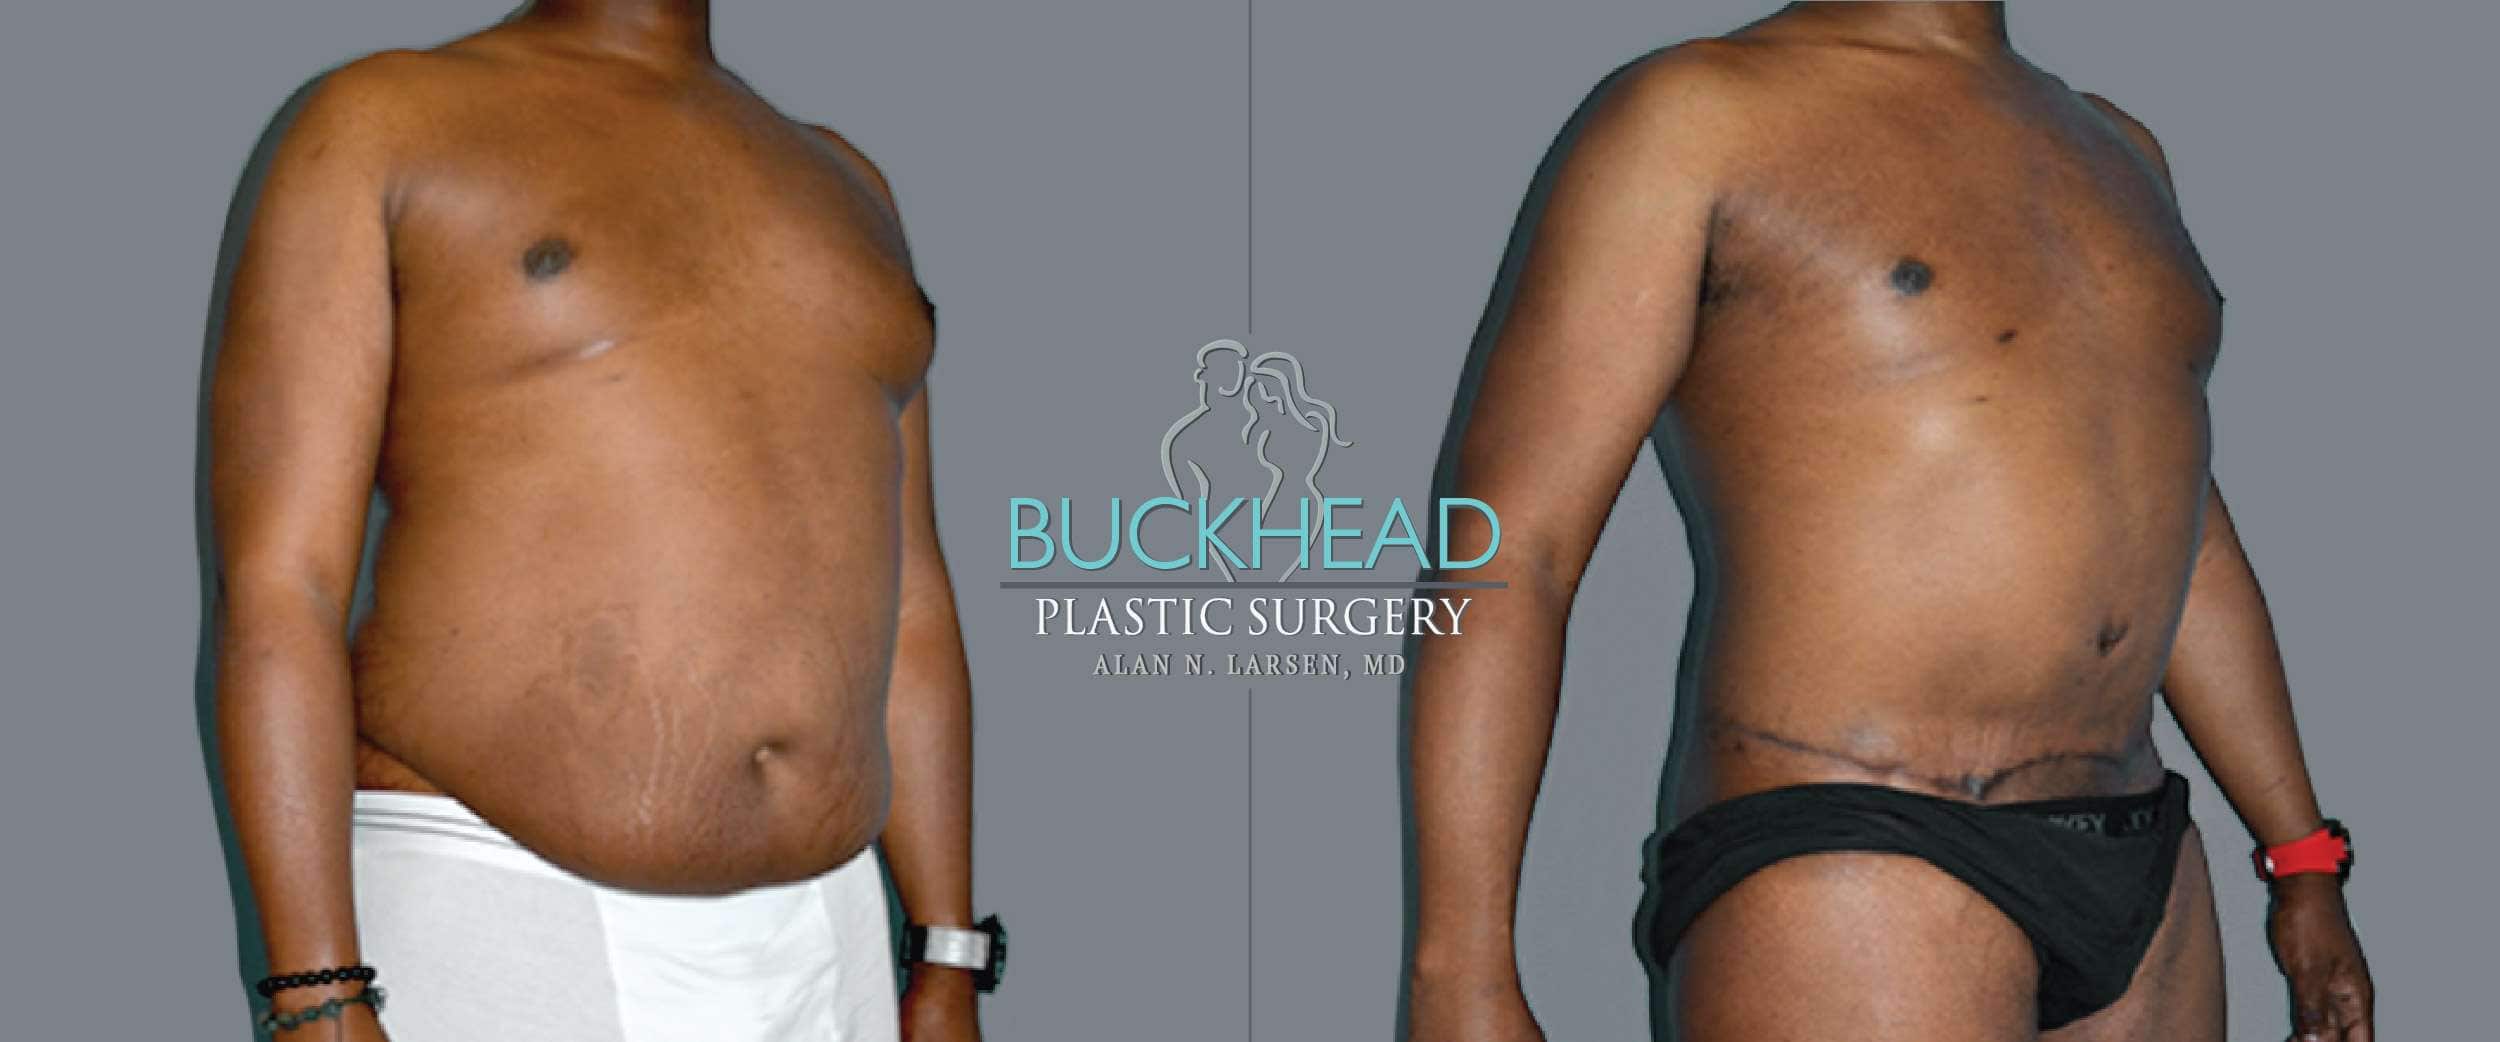 Before and After Photo Gallery | Gynecomastia - Male Breast Reduction & Correction | Buckhead Plastic Surgery | Board-Certified Plastic Surgeon in Atlanta GA